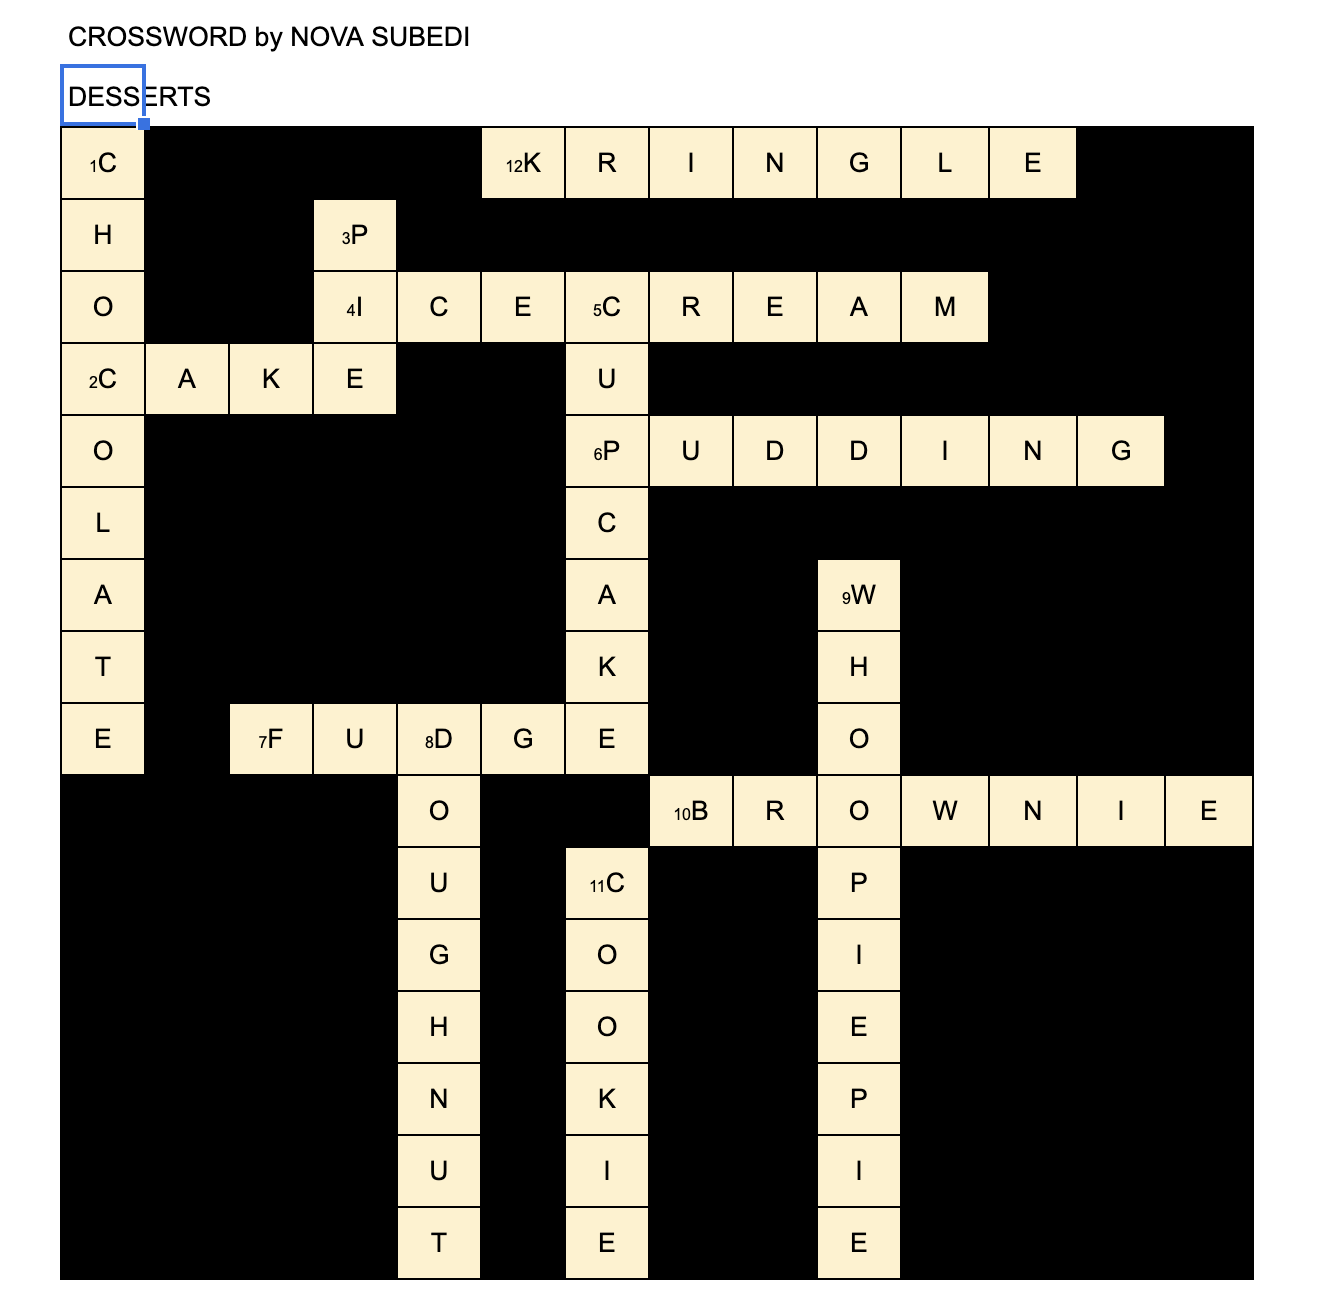 CROSSWORD PUZZLE Answer Keys: DESSERTS by Nova Subedi Our Sunday Project